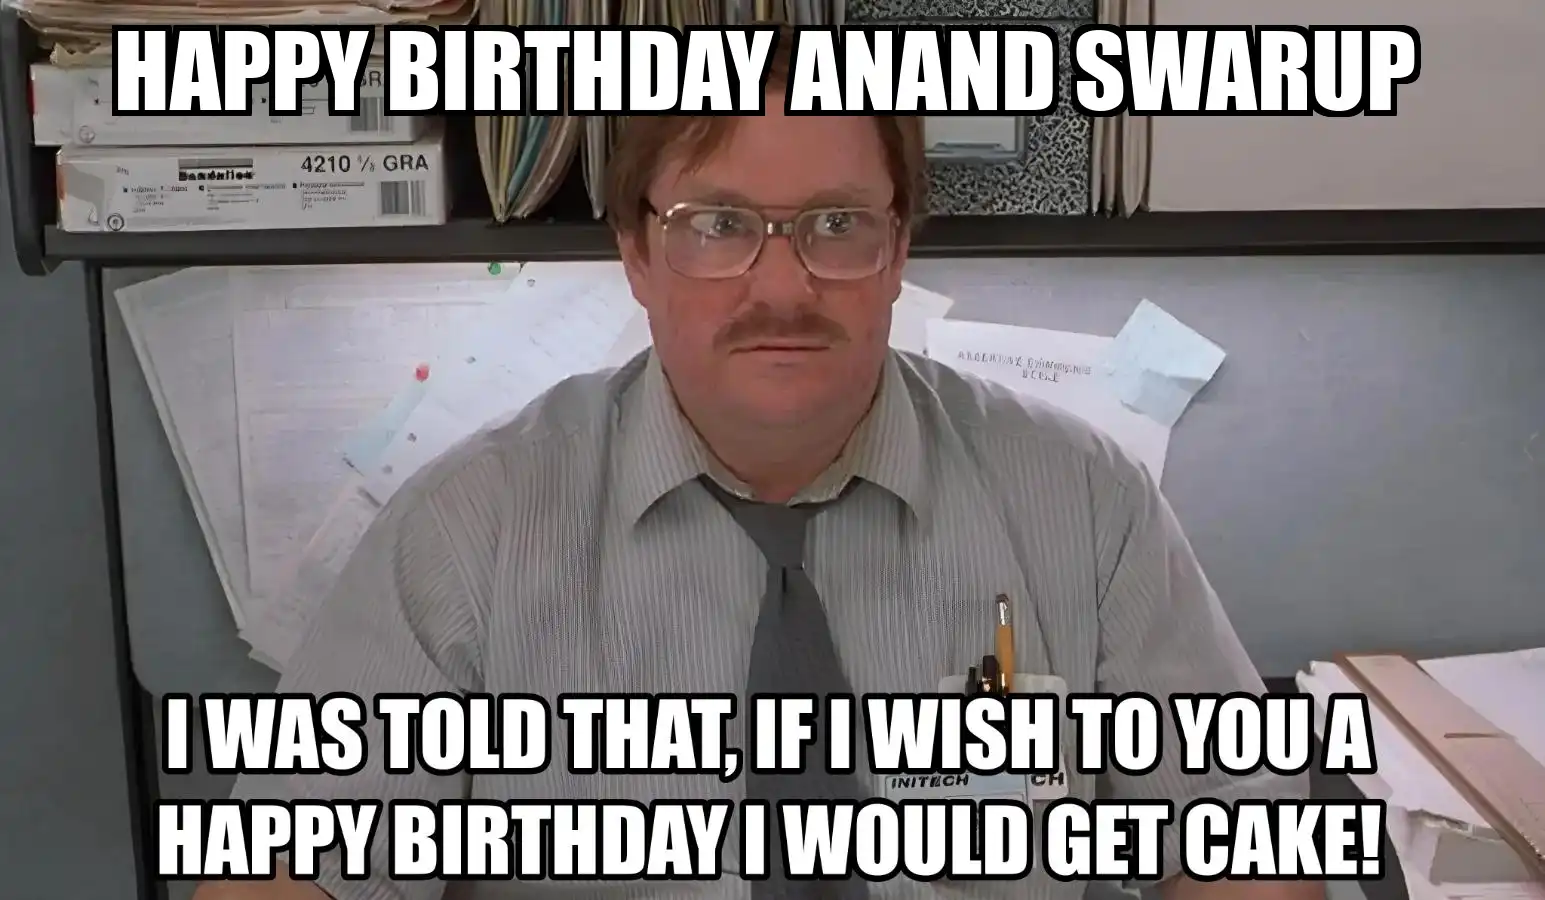 Happy Birthday Anand Swarup I Would Get A Cake Meme